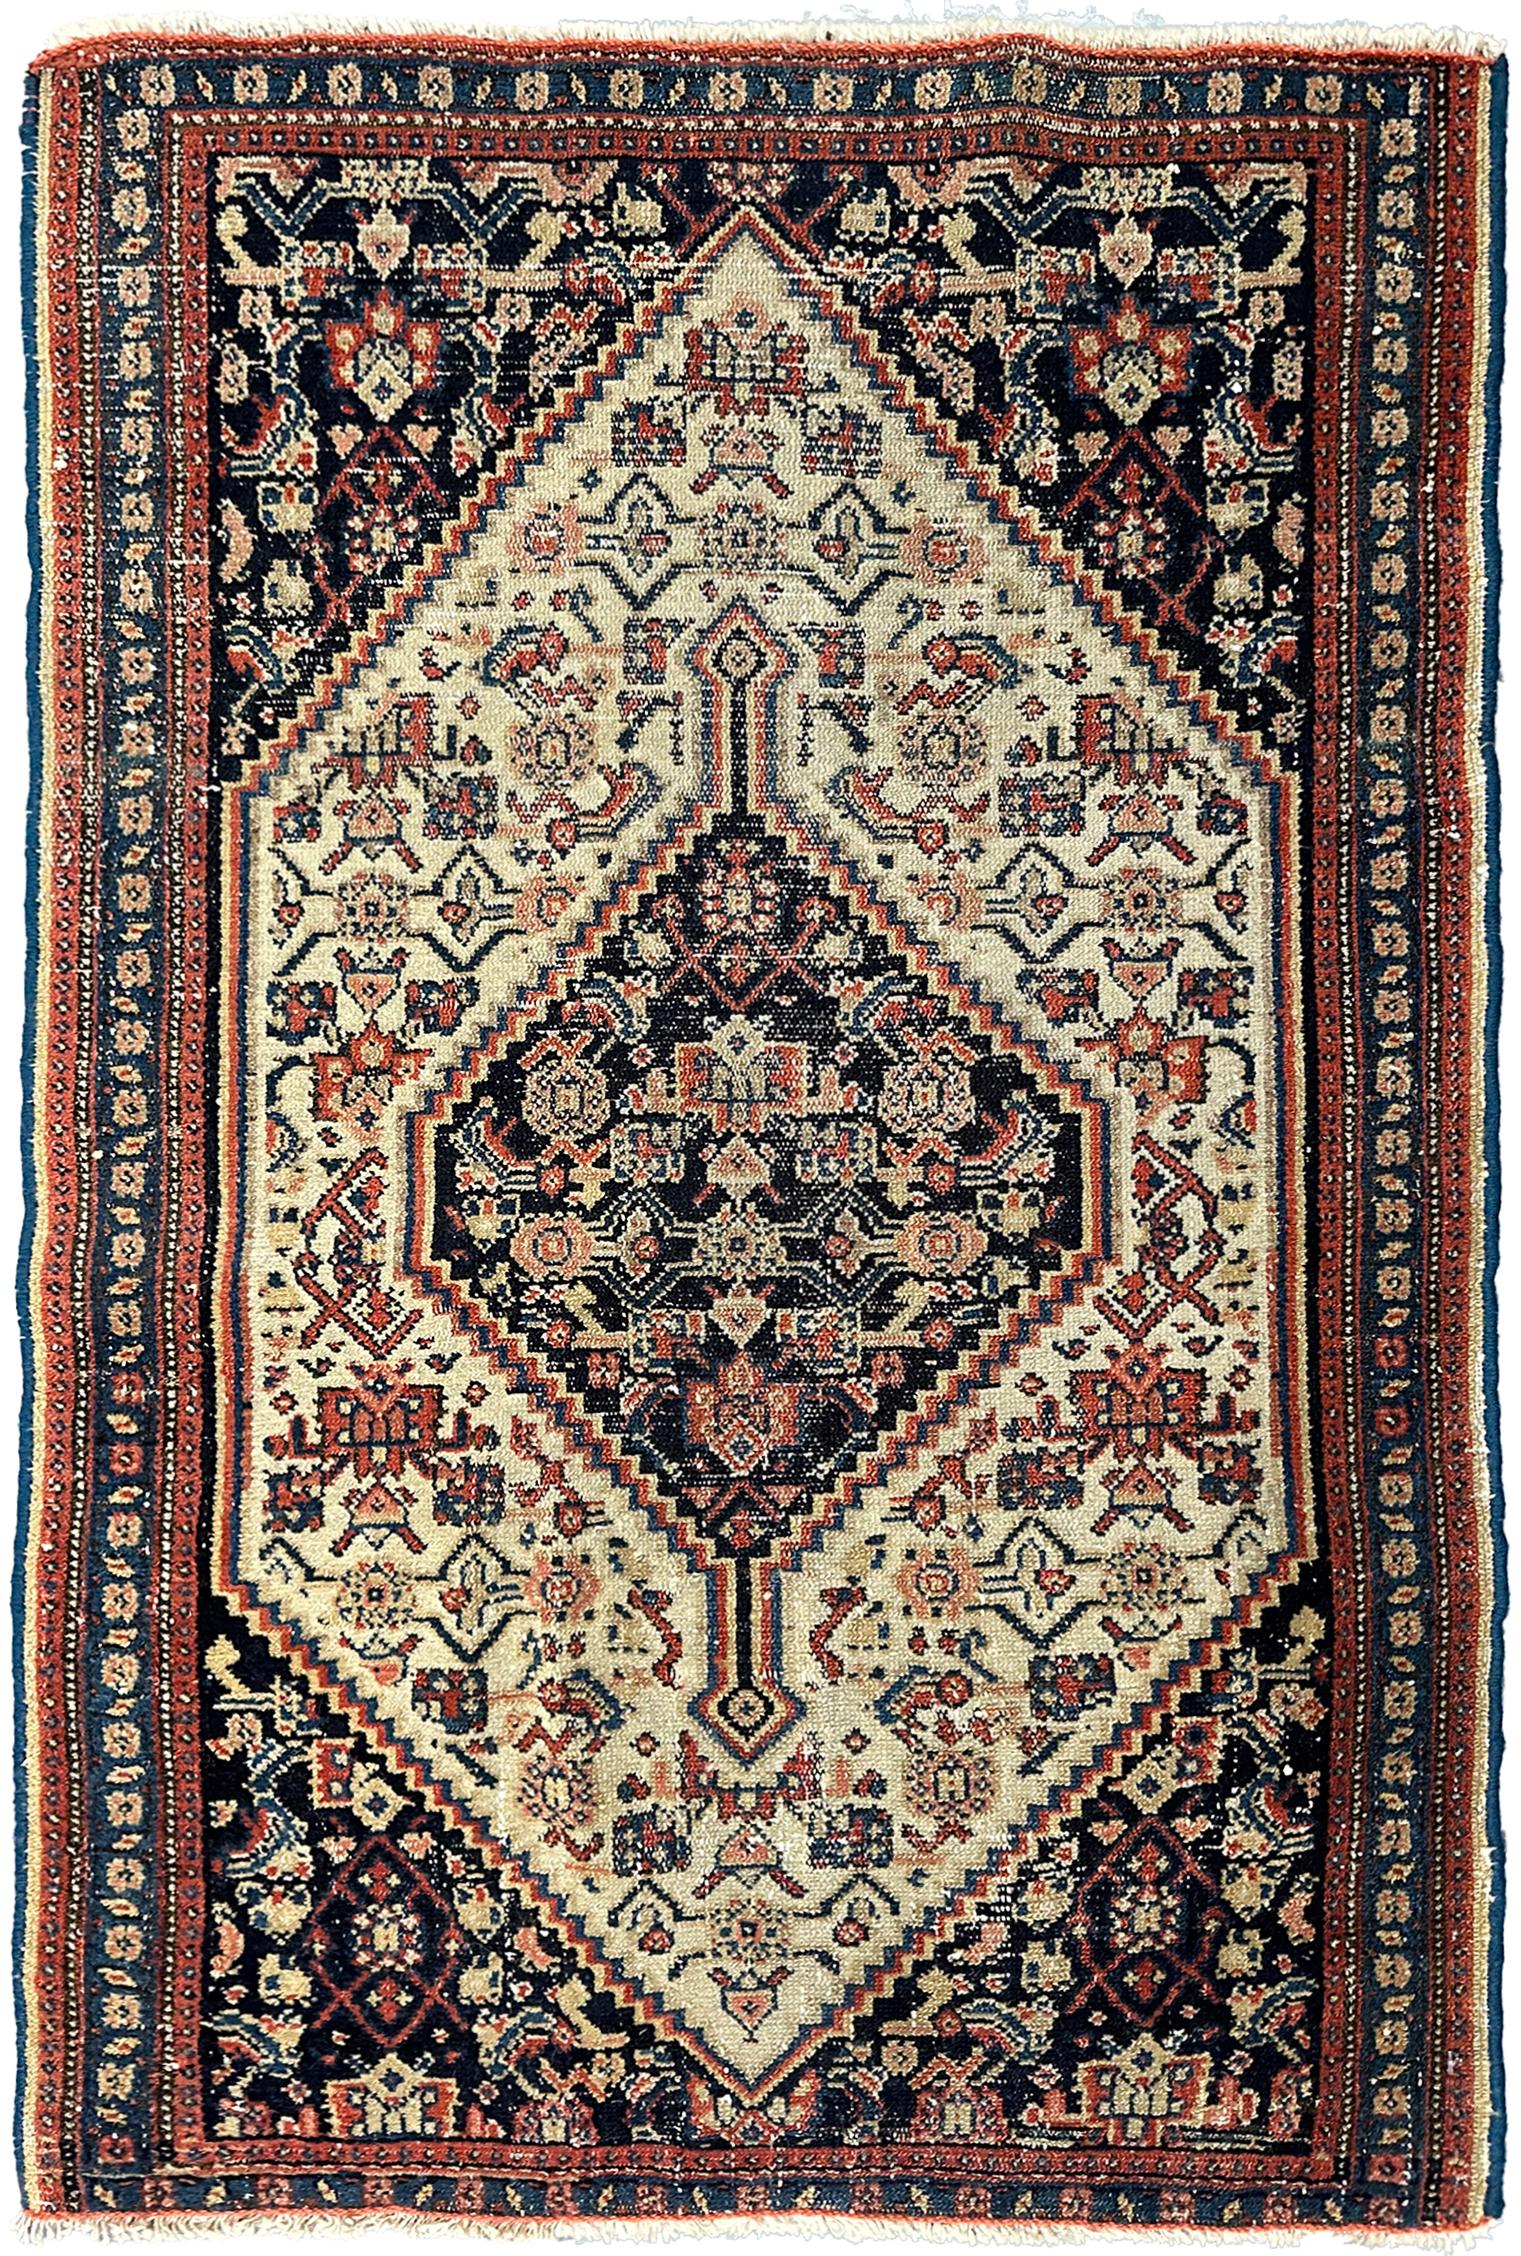 1910 Antique Senneh Rug Handmade Geometric

2x3	2'x3'  61cm x 92cm	

Great condition even low pile

About Us~

Welcome to Antique Rug Collection. Your #1 Source for handmade Antique Rugs & Tapestries at great prices, curated by leading industry